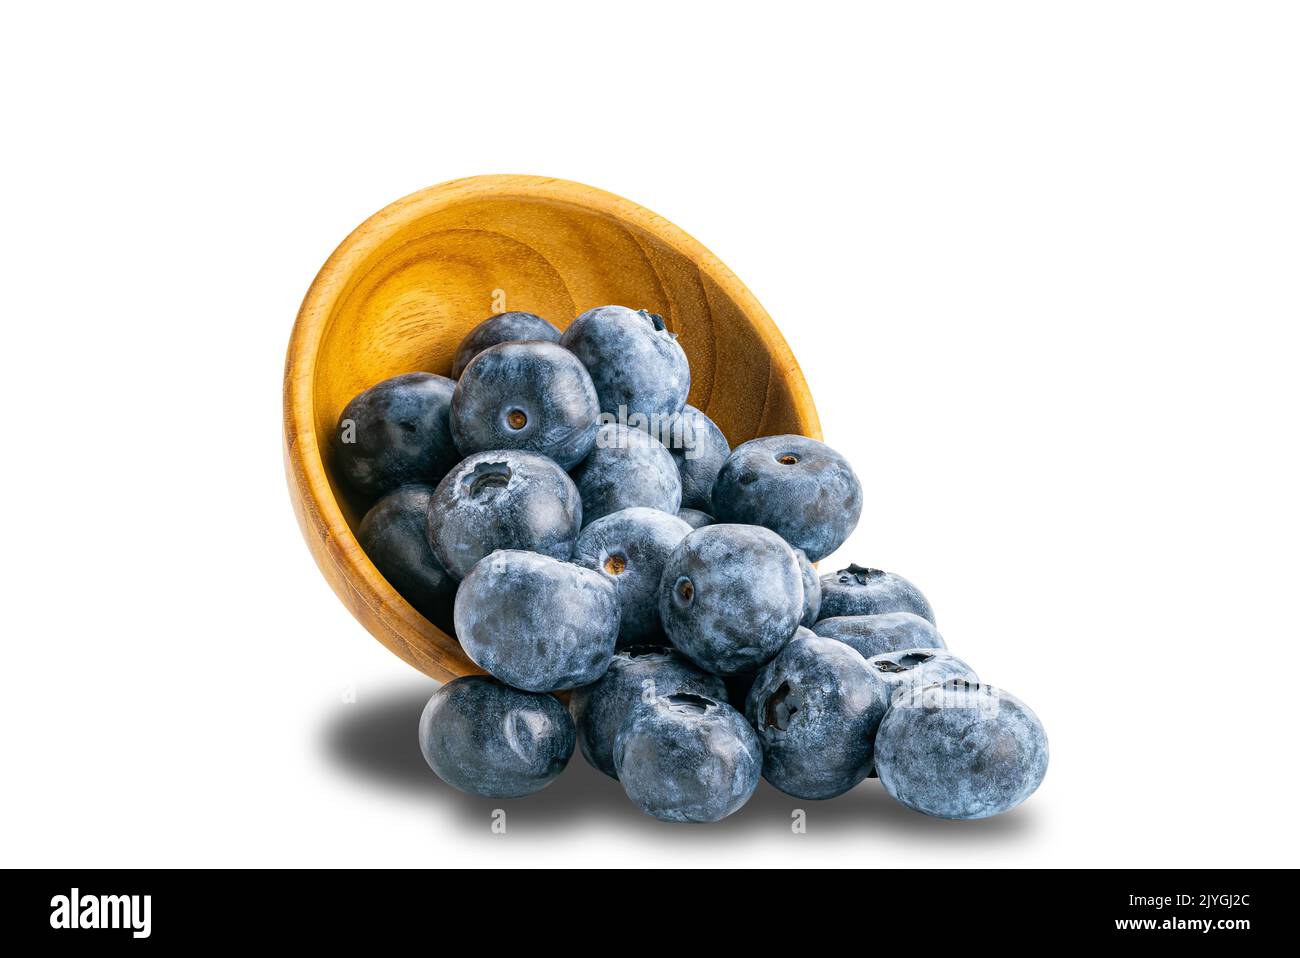 Pile of fresh blueberry in wooden bowl isolated on white background with clipping path. Stock Photo